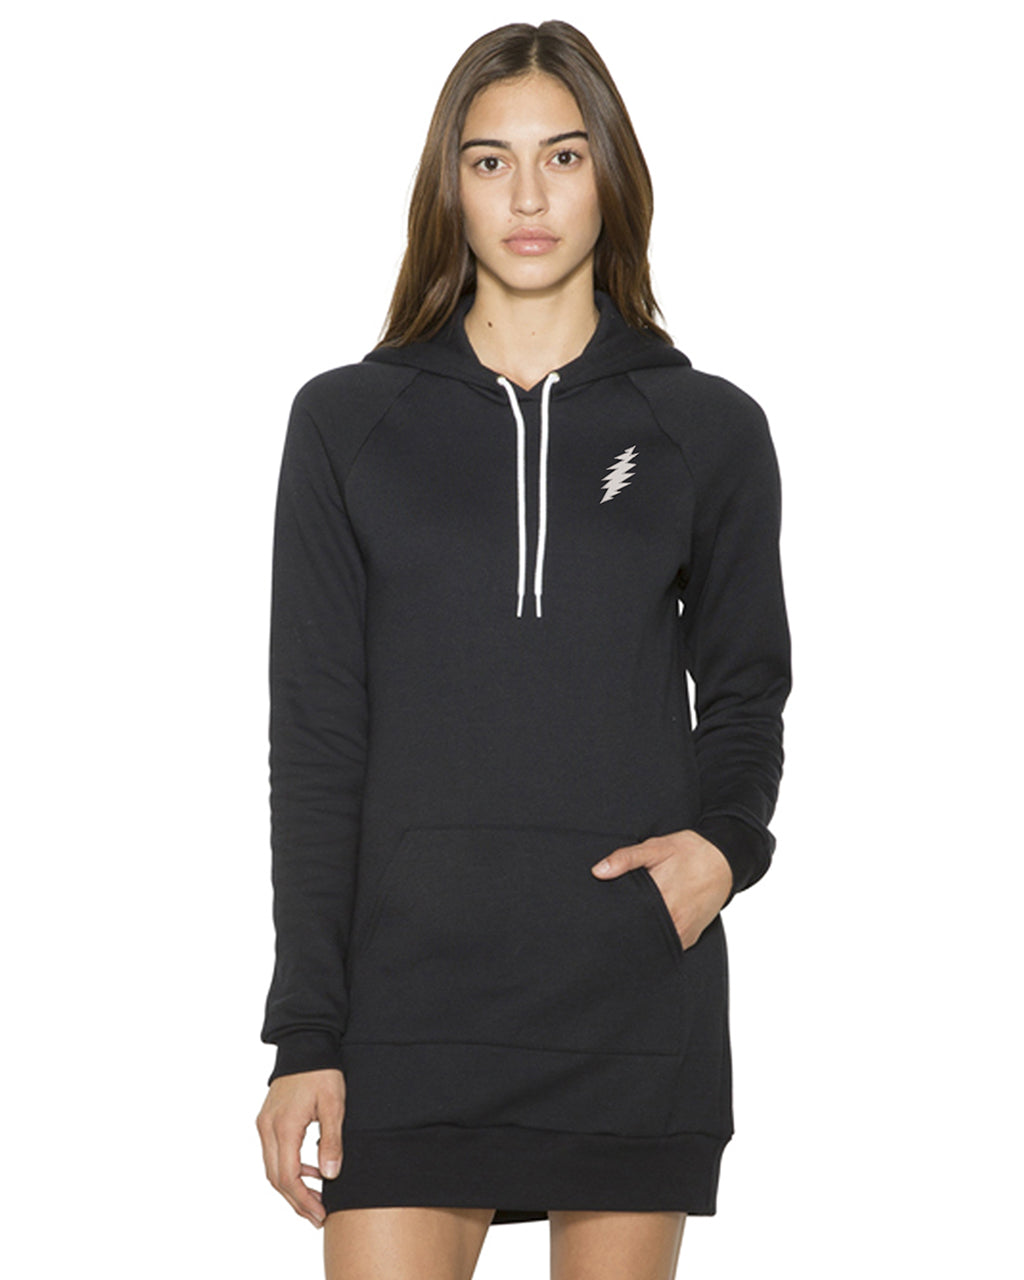 Embroidered GD Bolt on American Apparel Hooded Dress